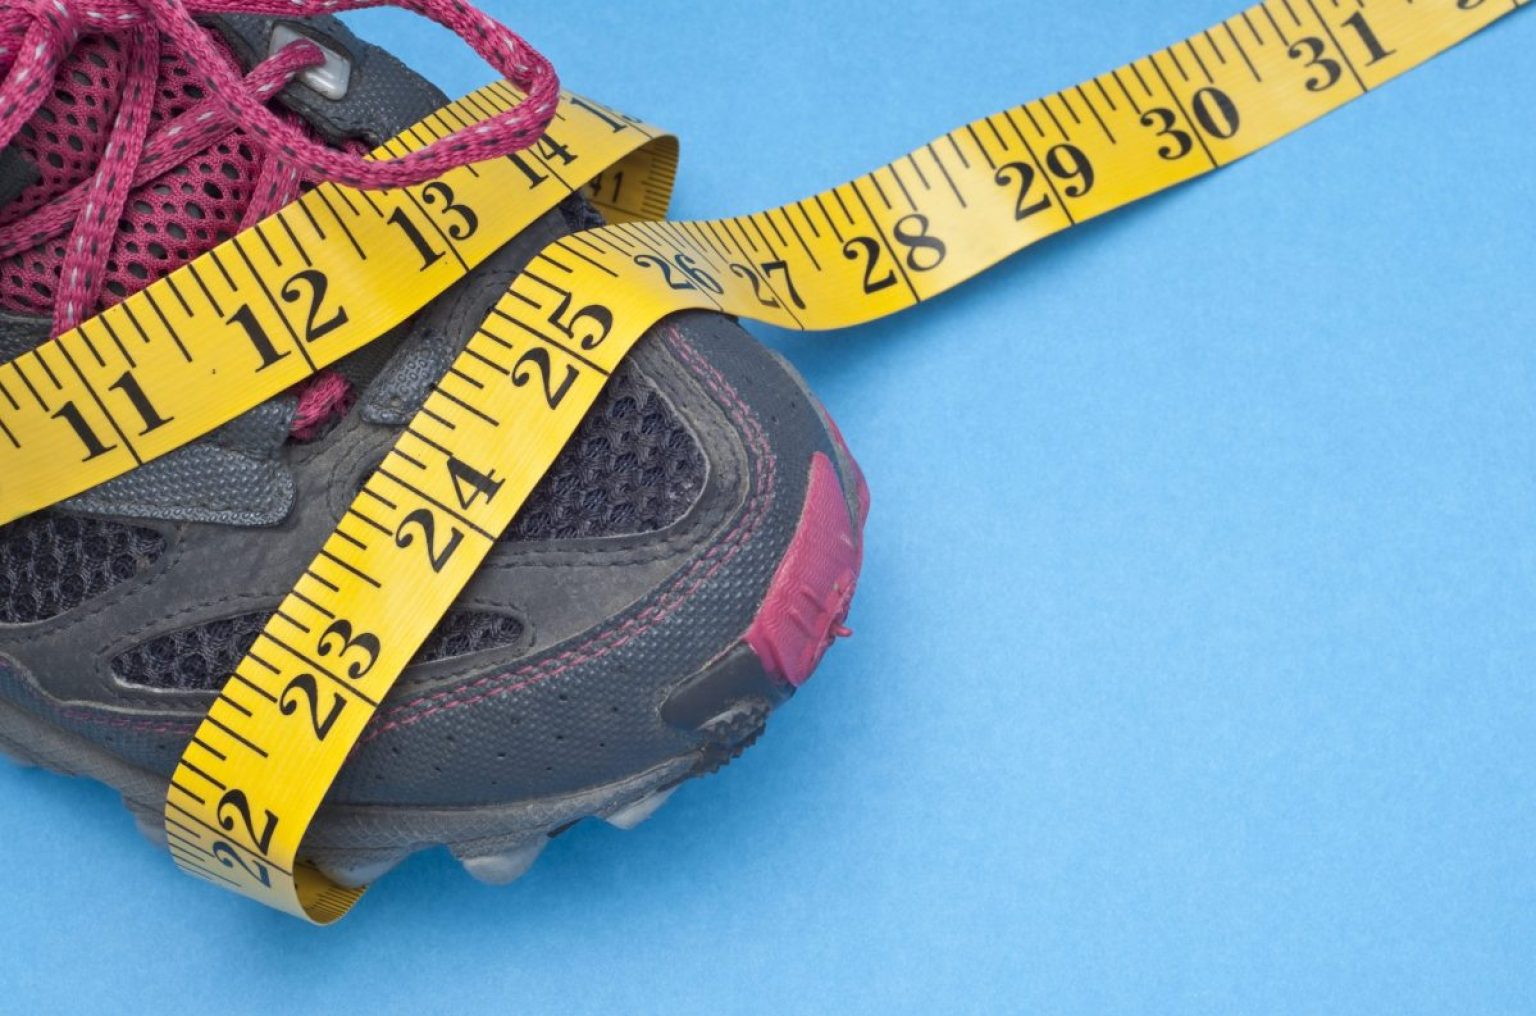 How To Measure Shoe Width? - The Shoe Box NYC